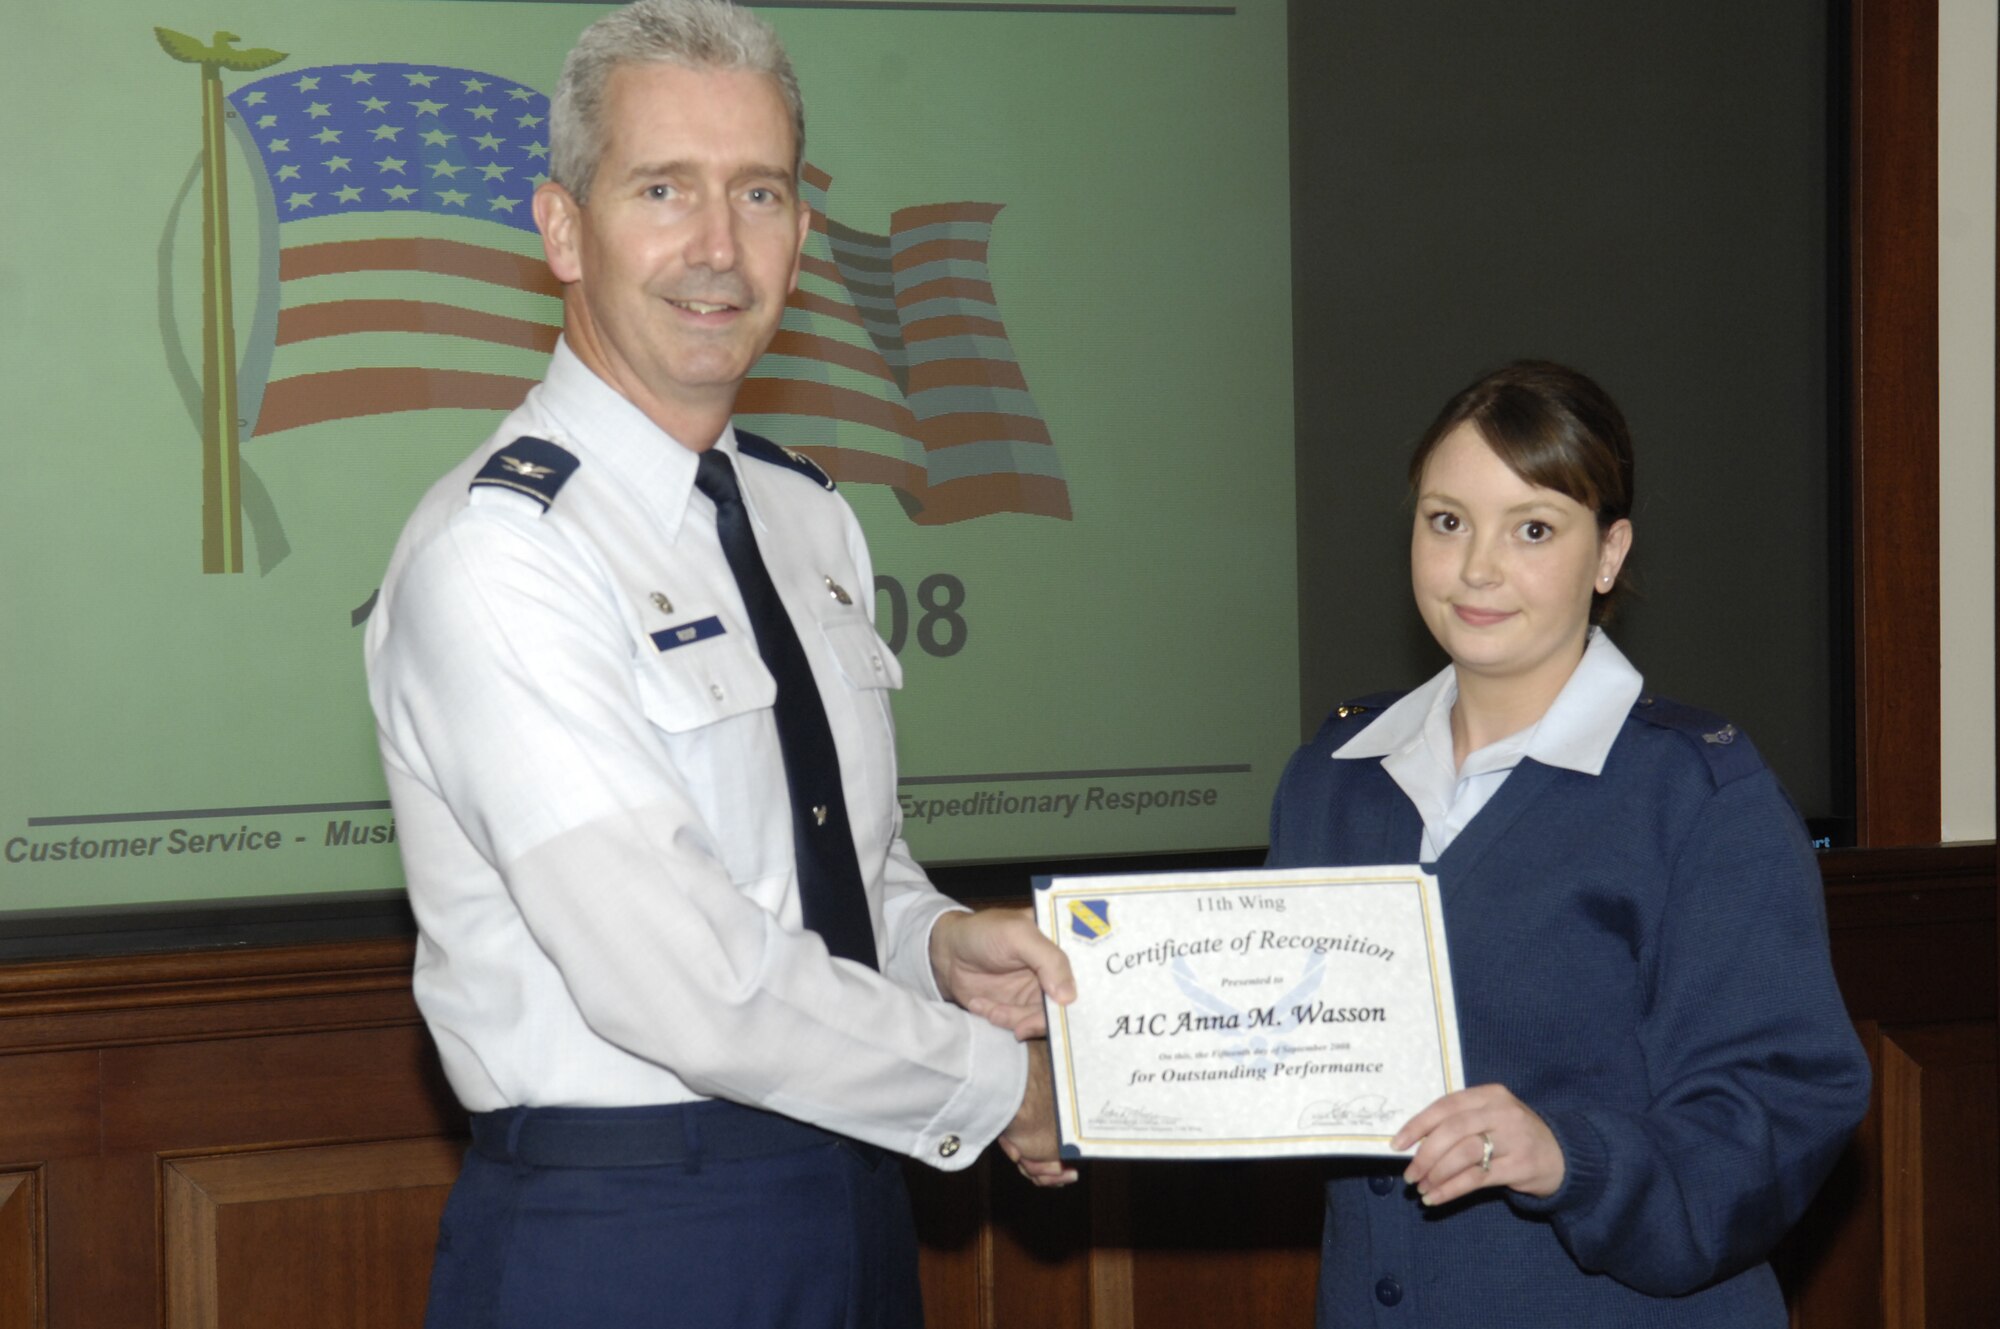 Col. Jon A. Roop, 11th Wing commander, presents a certificate and coin to Airman 1st Class Anna M. Wasson, 11th Operations Group, Sept. 15 in the wing conference room. Airman Wasson was recognized for spearheading the validation of 450 network accounts and being named the 11th Wing Information Manager of the Quarter.  (U.S. Air Force photo by Senior Airman R. Michael Longoria)